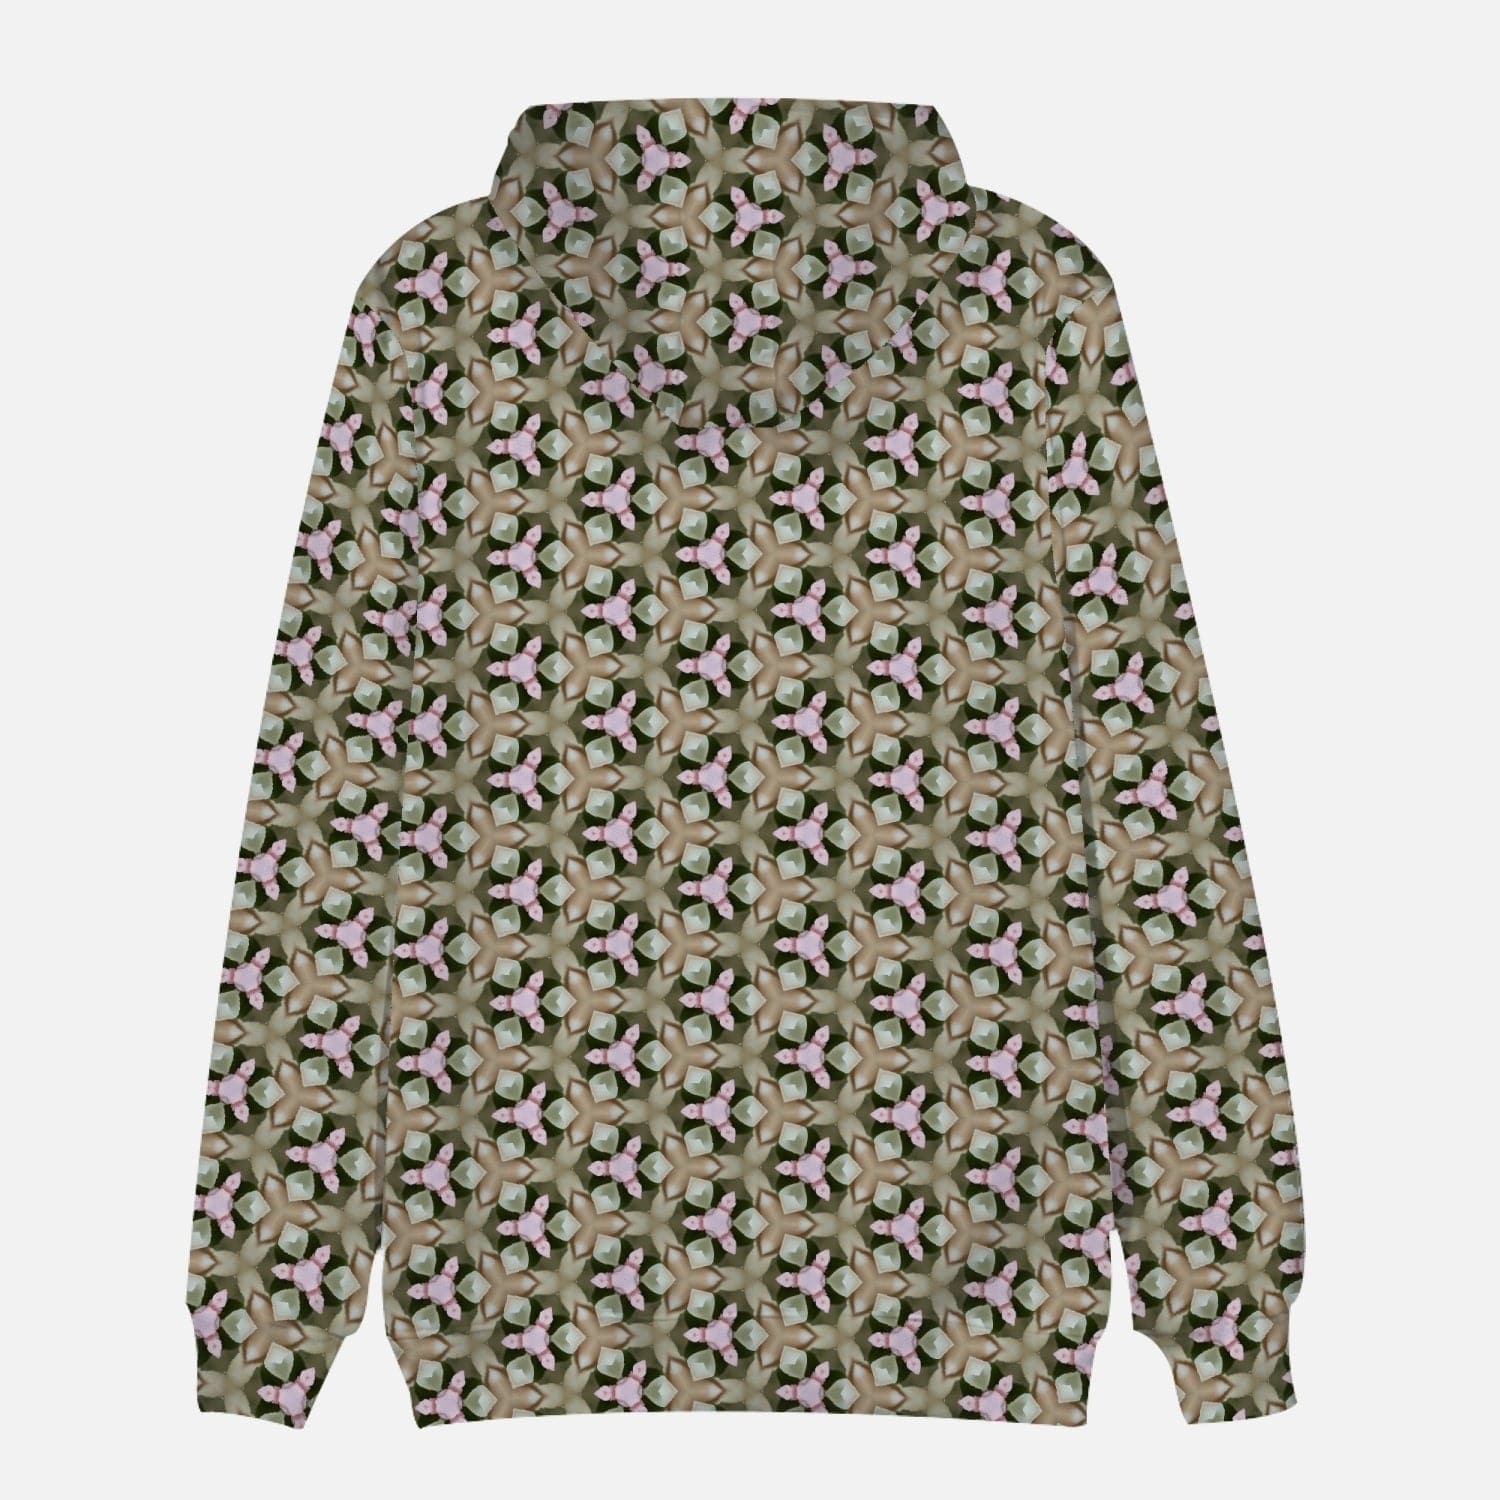 Sand ,green and pink patterned trendy  Round Collar Hoodie, by Sensus Studio Design